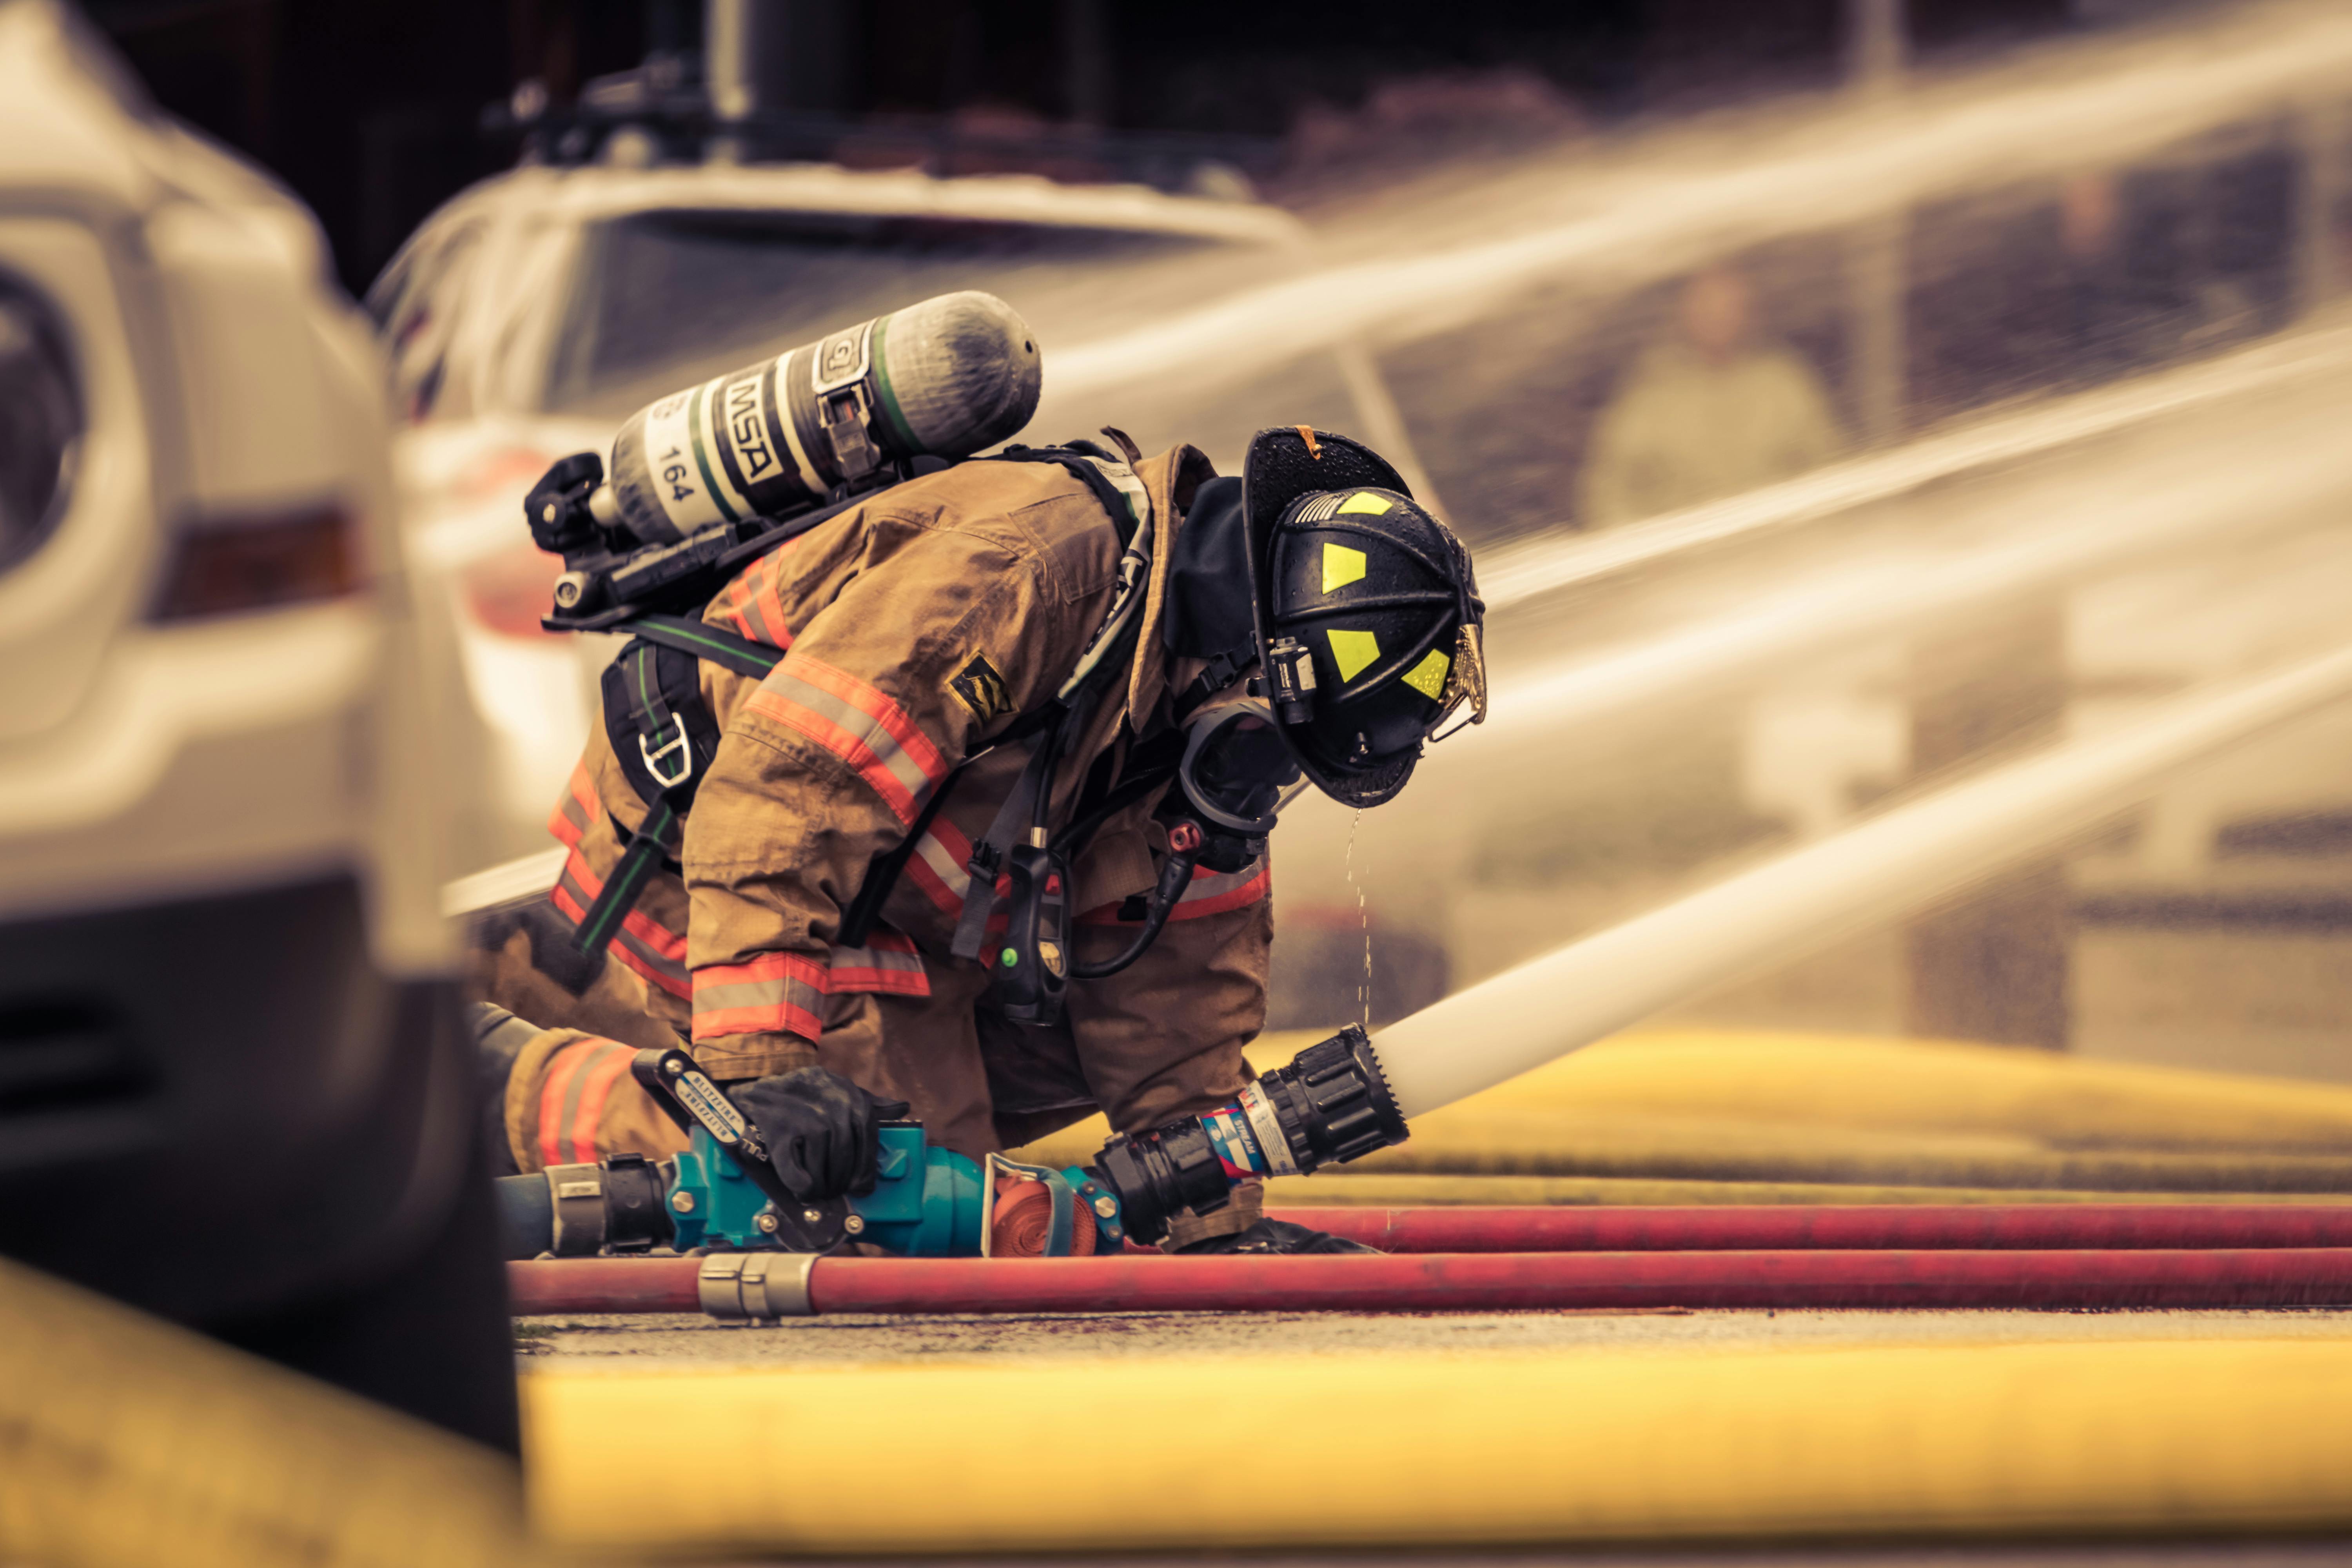 Firefighter Wallpaper Android क लए APK डउनलड कर